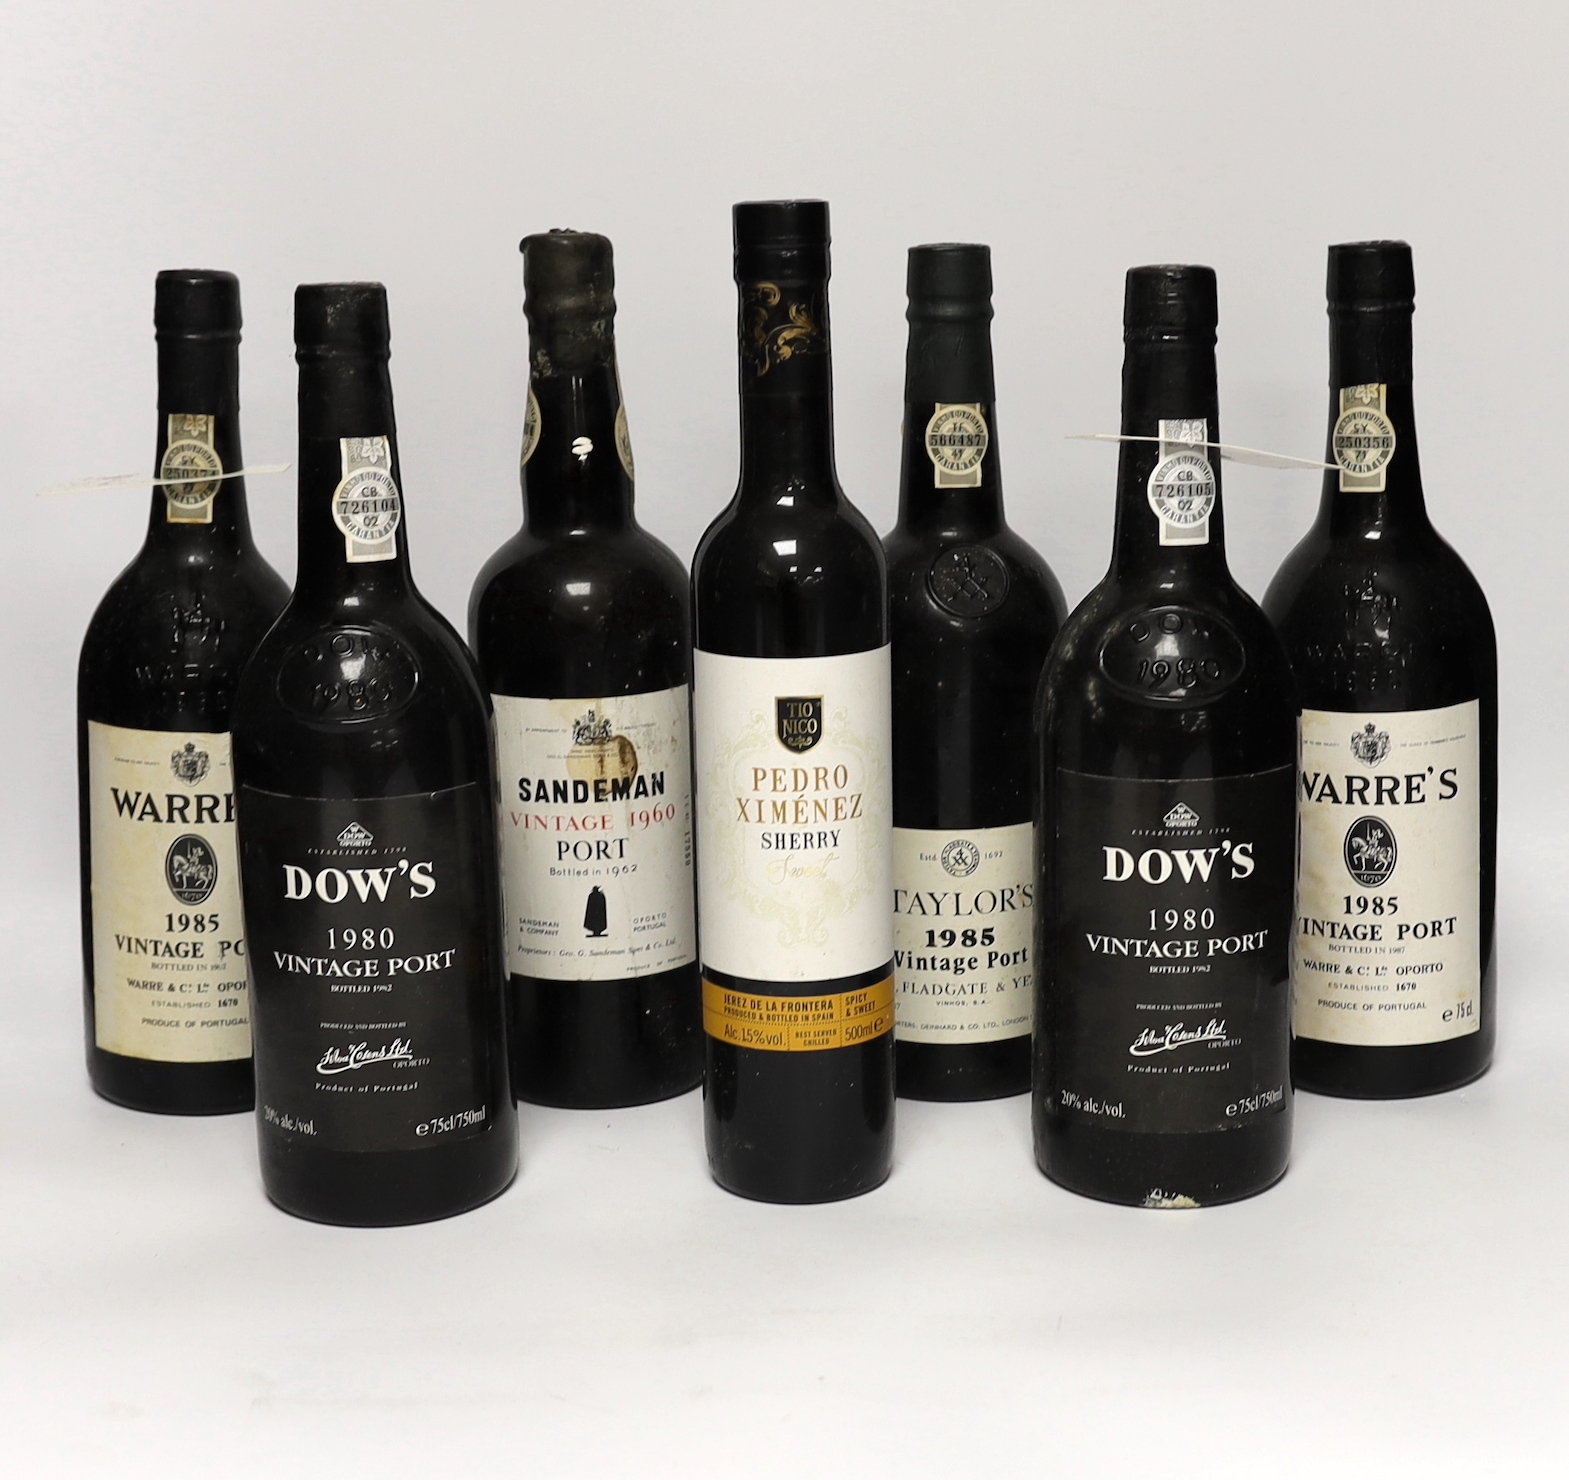 One bottle of Sandeman vintage port 1960, two bottles of Dow’s port 1980, two bottles of Warr’s port 1985, a bottle of Taylors port 1985 and a bottle of Pedro Ximenez sherry (7)